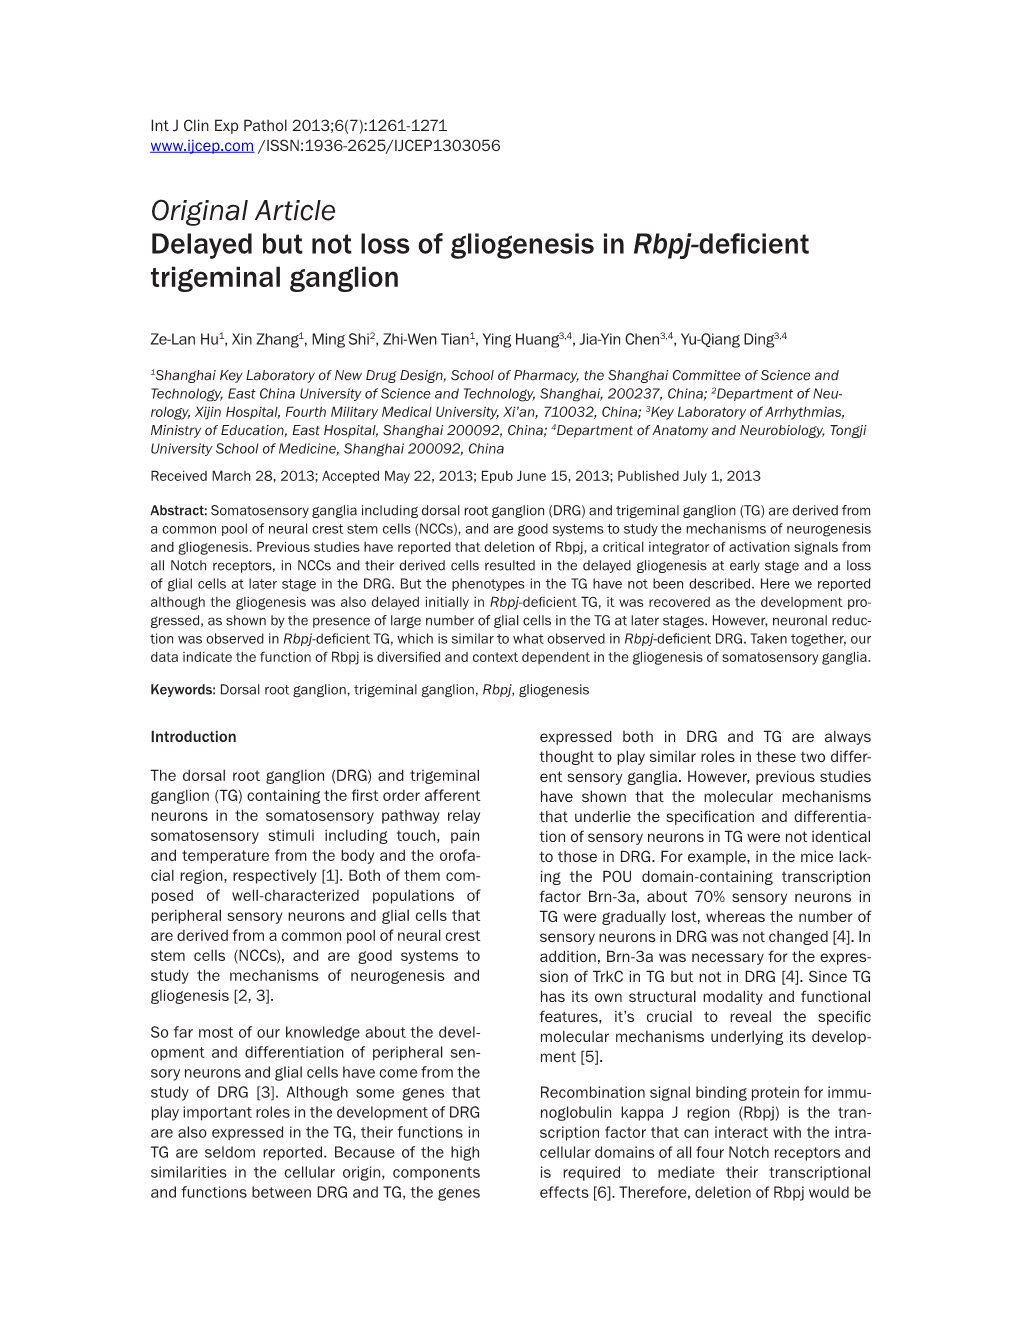 Original Article Delayed but Not Loss of Gliogenesis in Rbpj-Deficient Trigeminal Ganglion